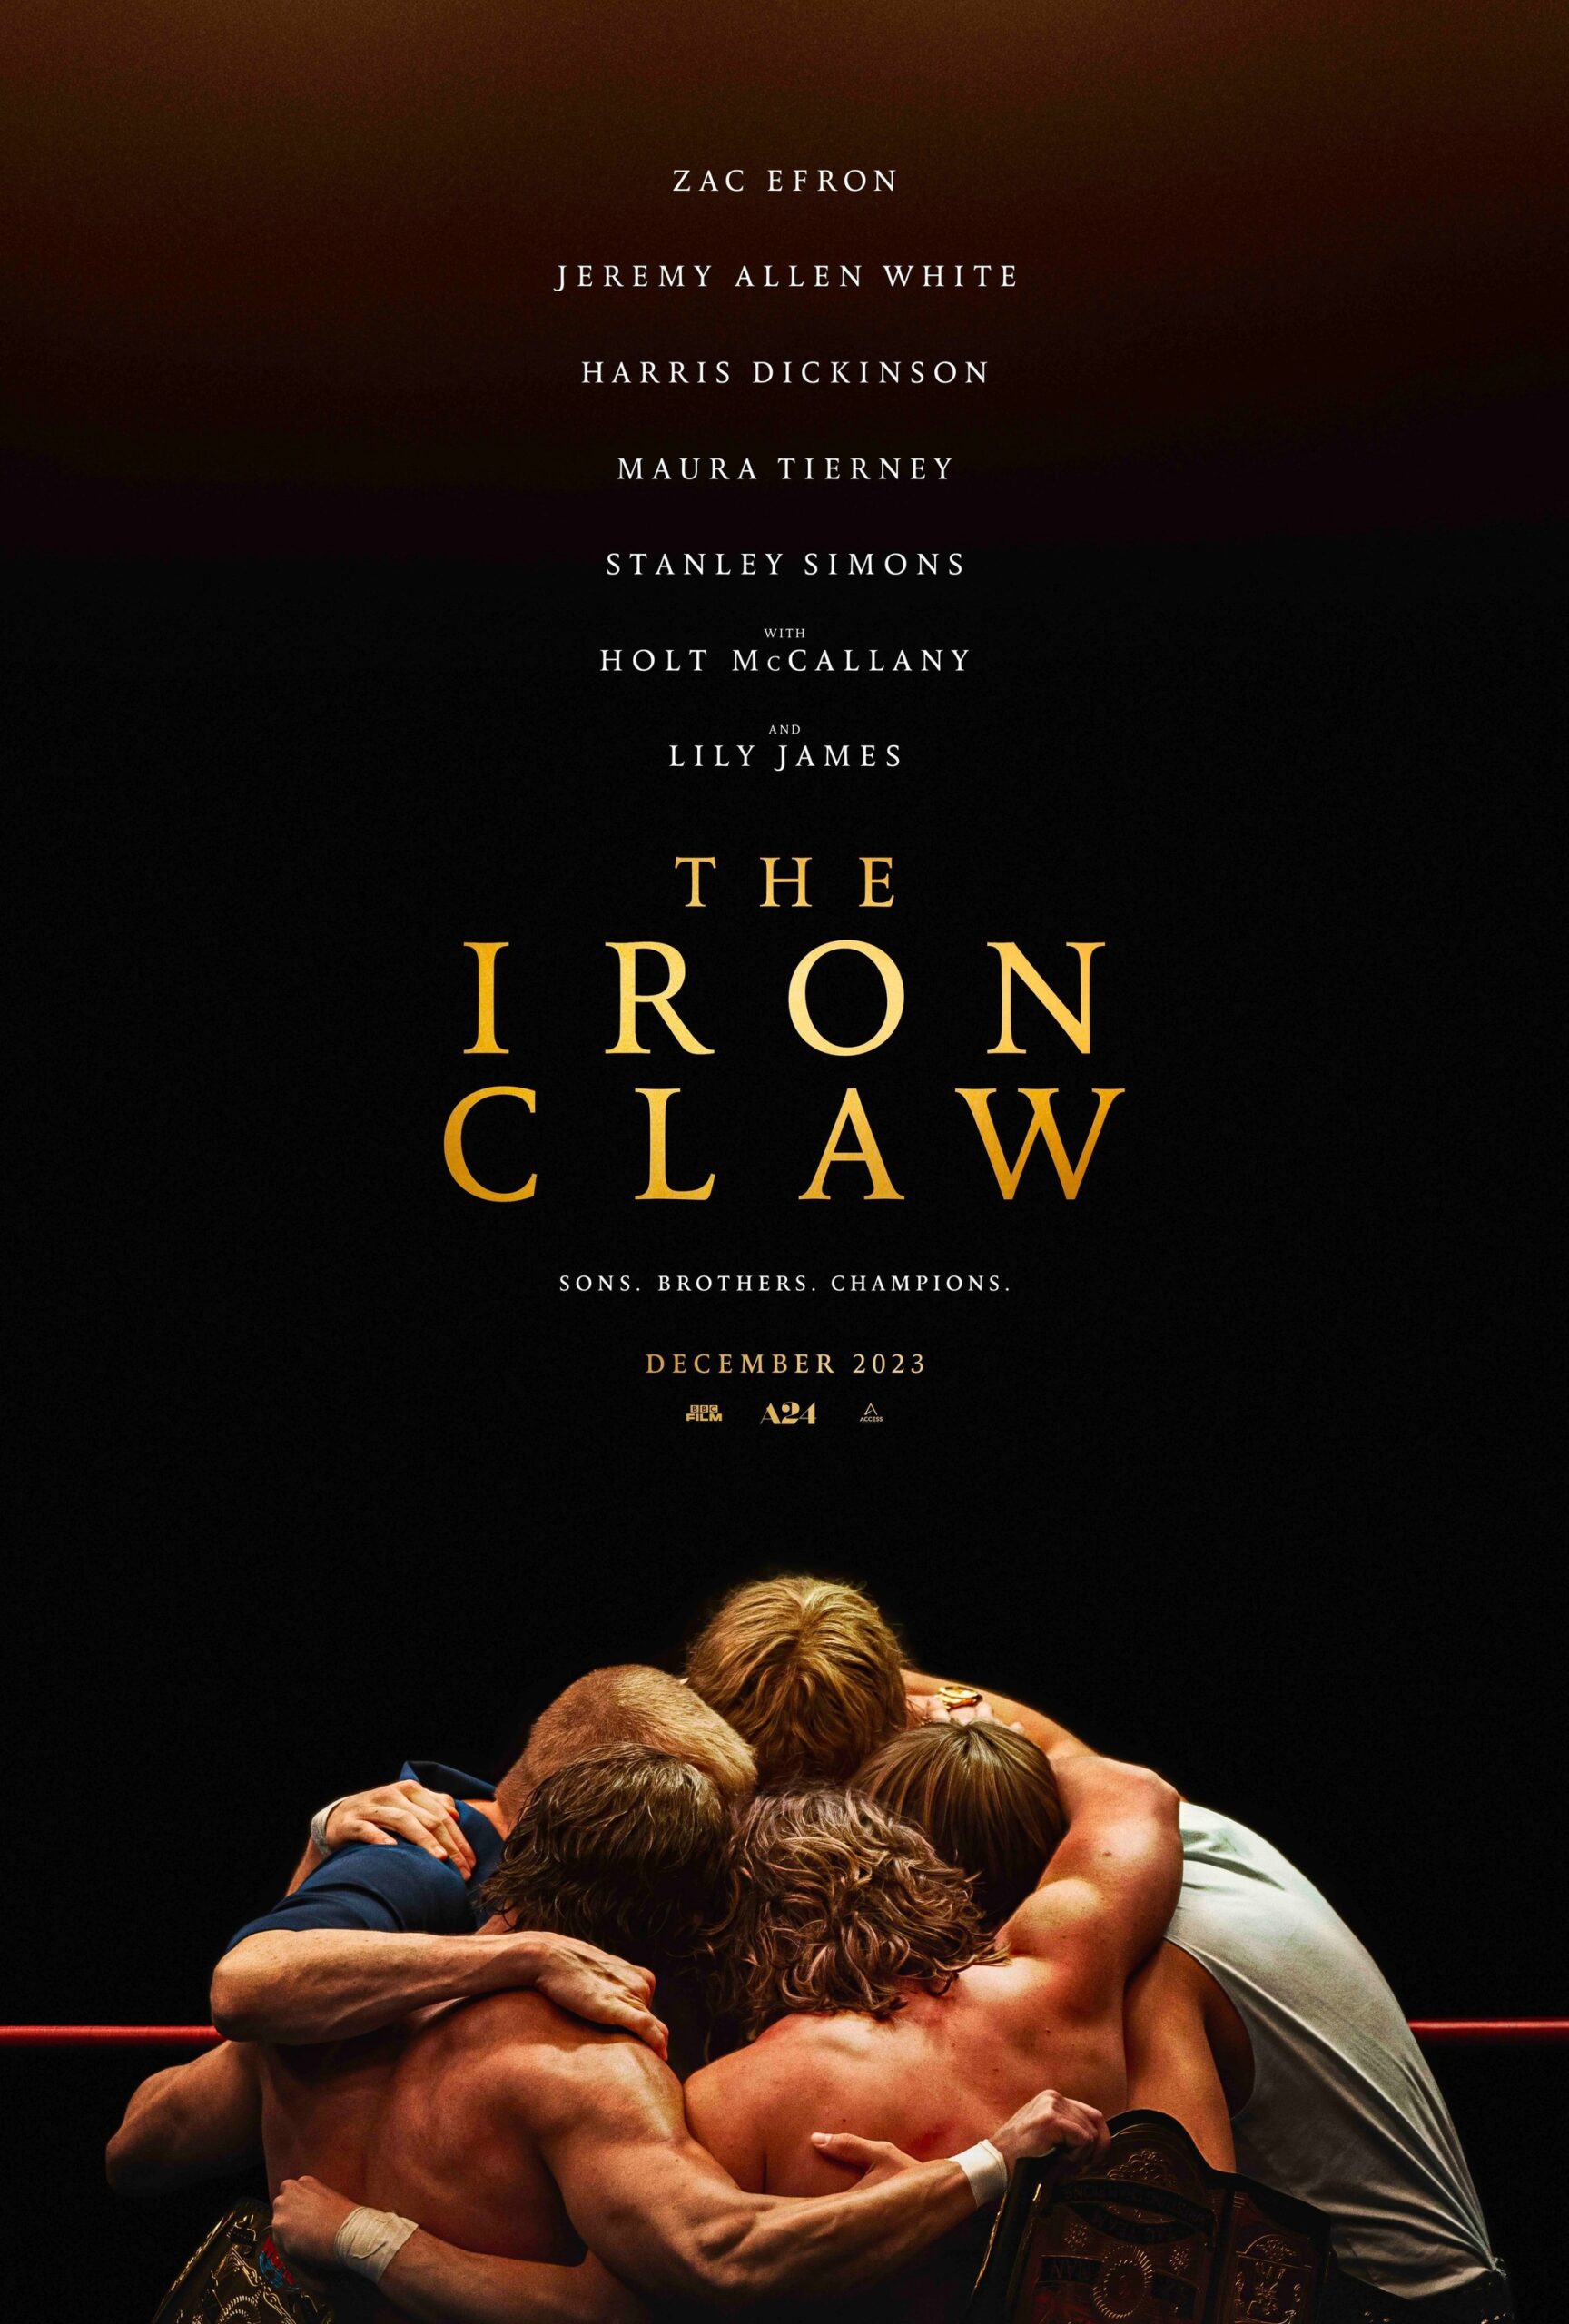 The Iron Claw – Check Out Latest Film Review